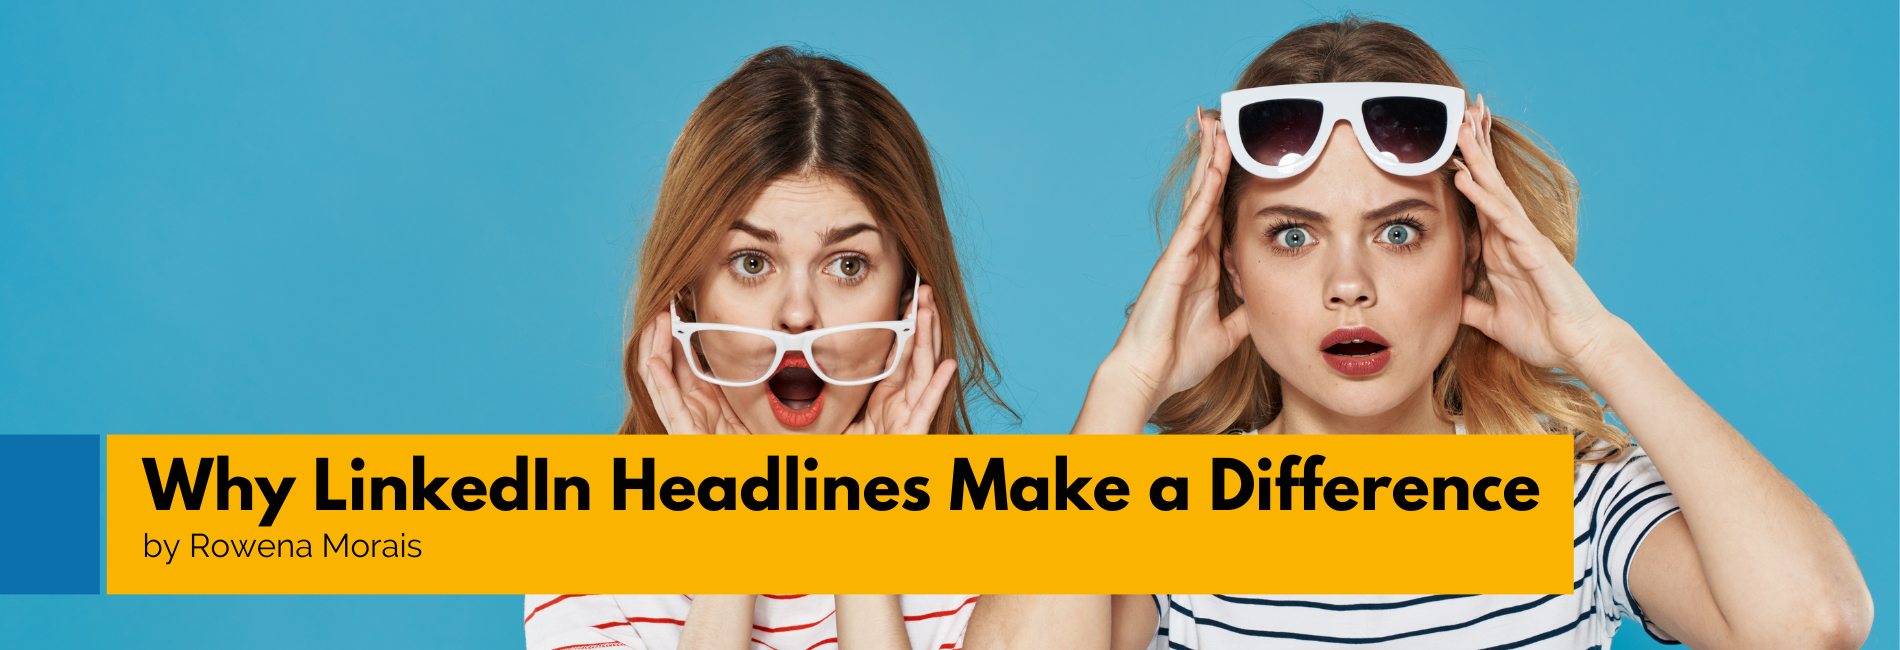 DC Why LinkedIn Headlines Make a Difference